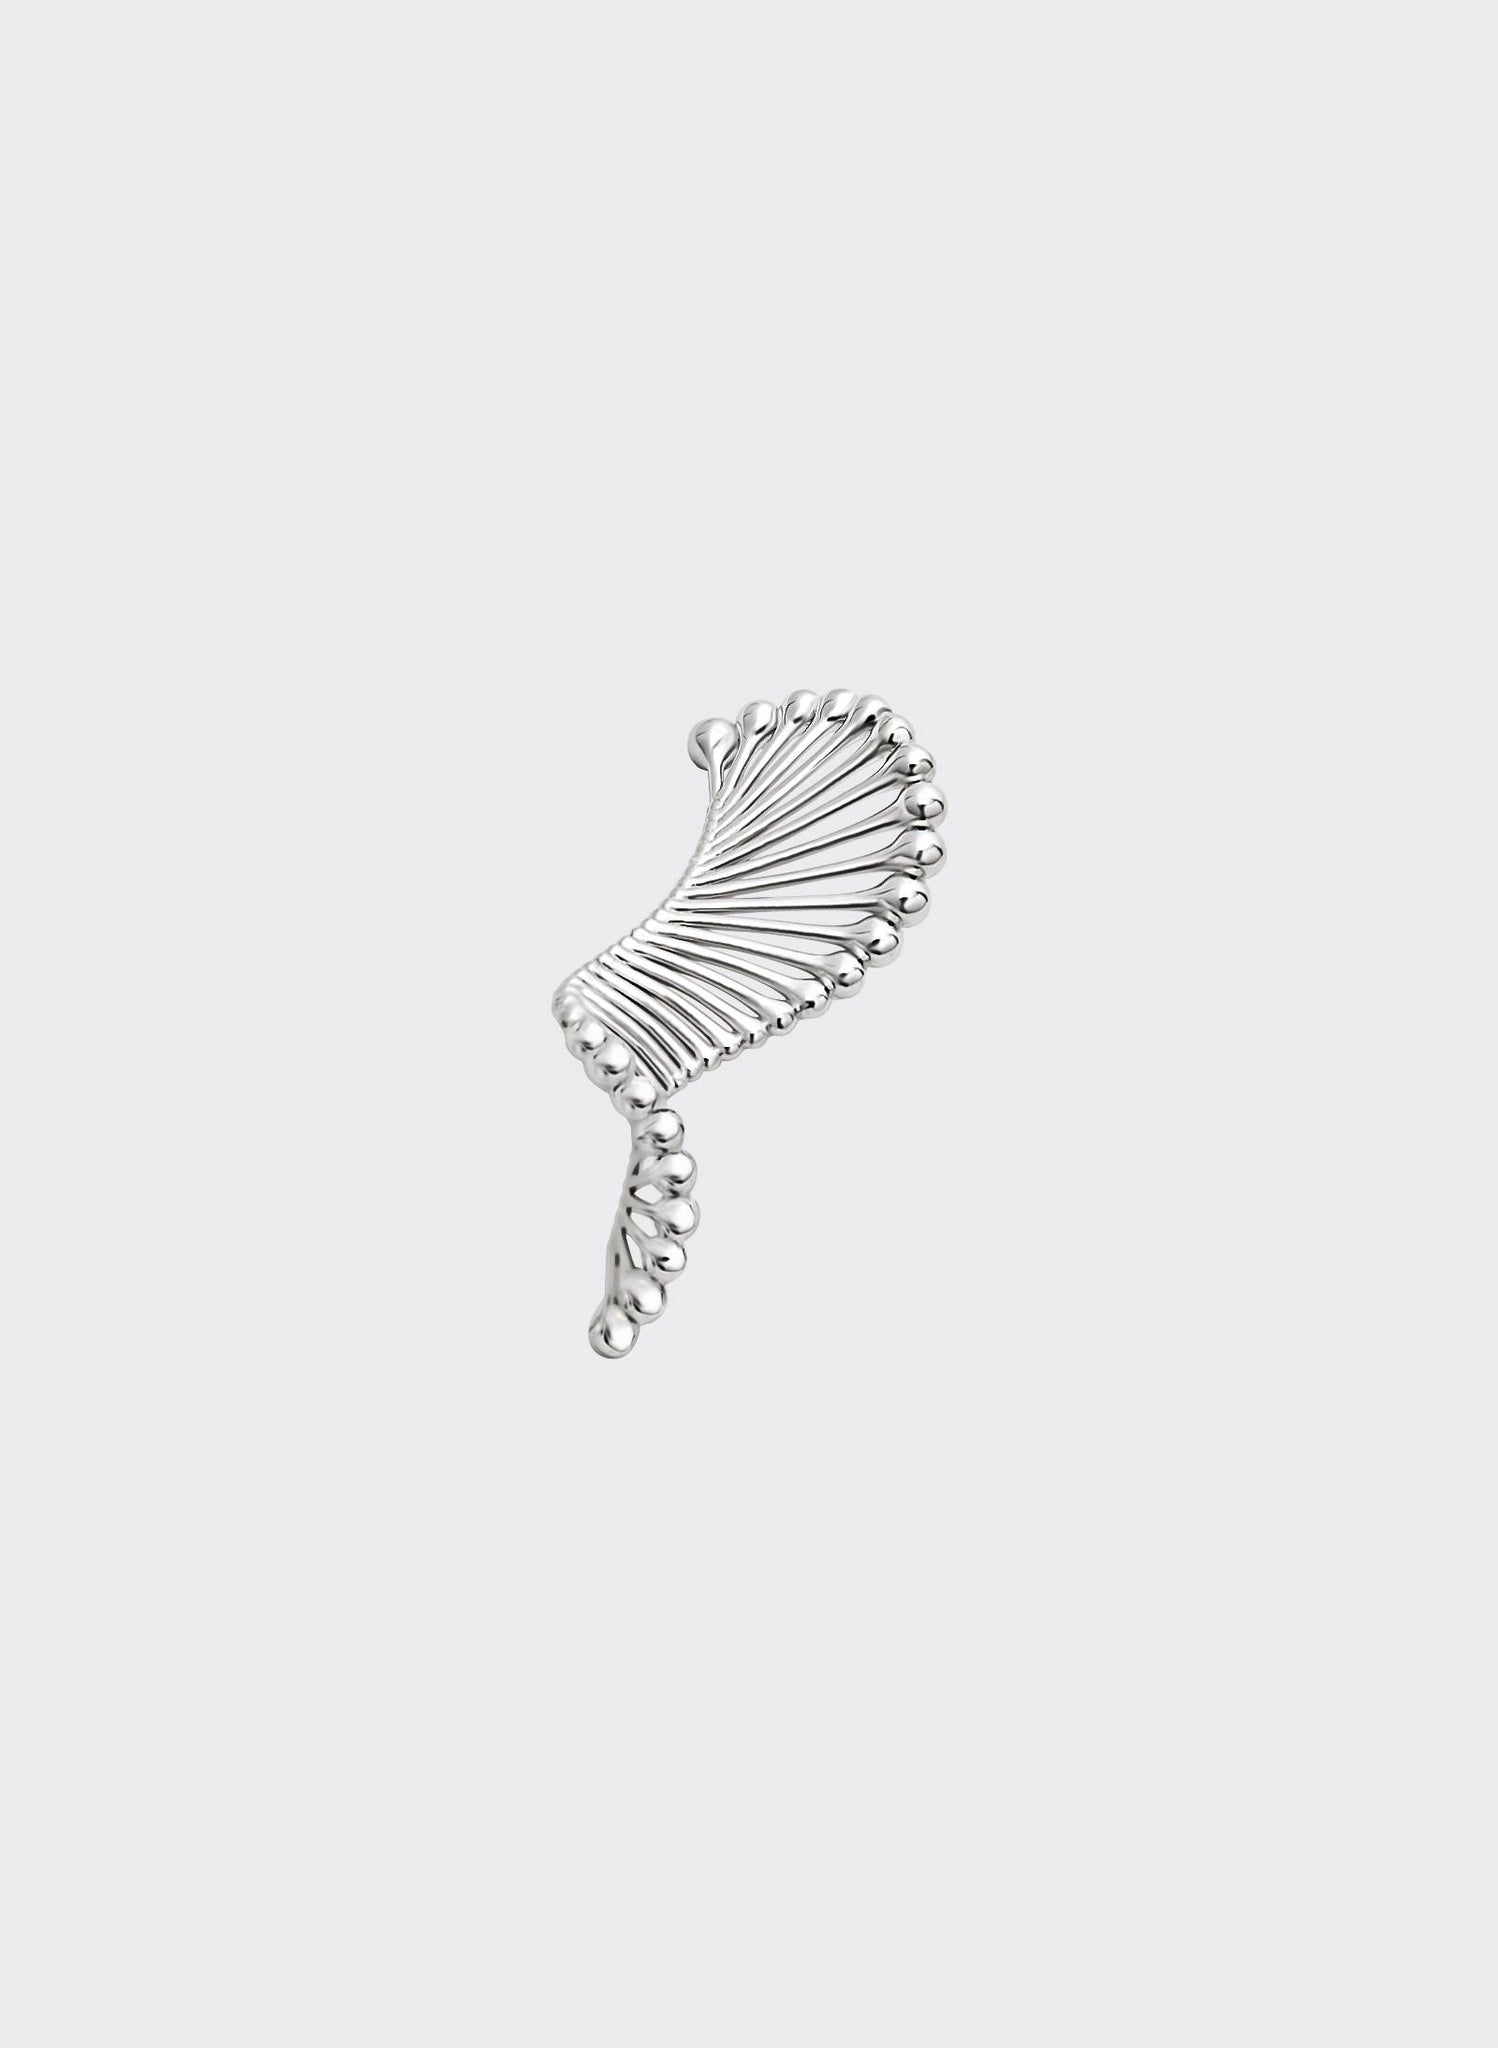 DNA Small Earrings